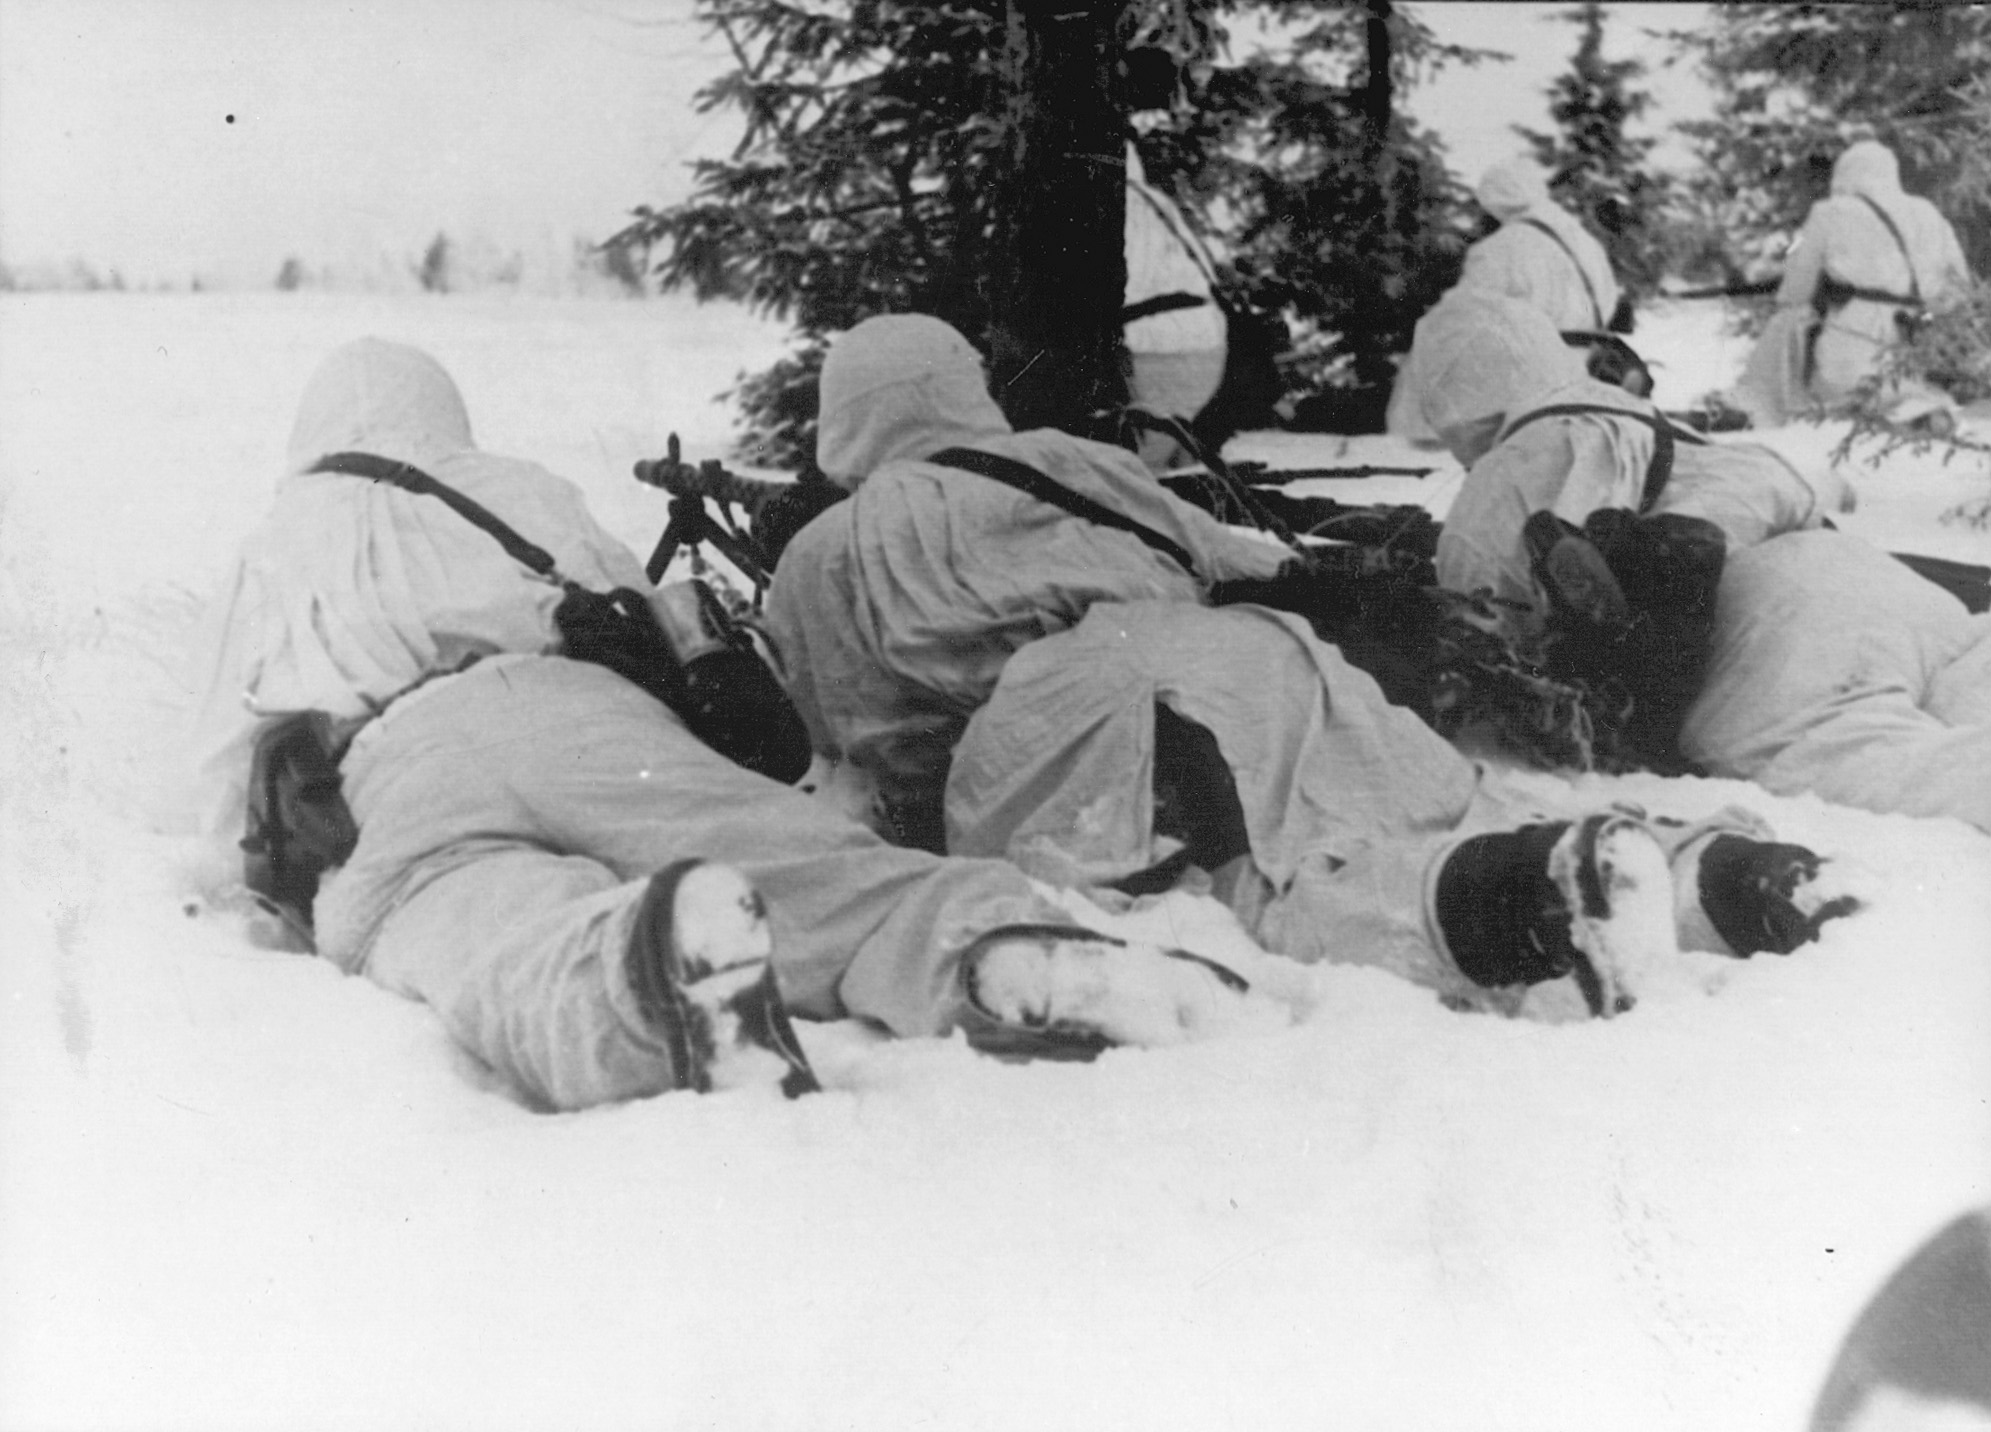 German machine gunners, camouflaged for winter warfare, scan an open field for targets. The vanguard of the Soviet offensive near Rzhev ran into a determined defense mounted by crack troops of the elite SS. 